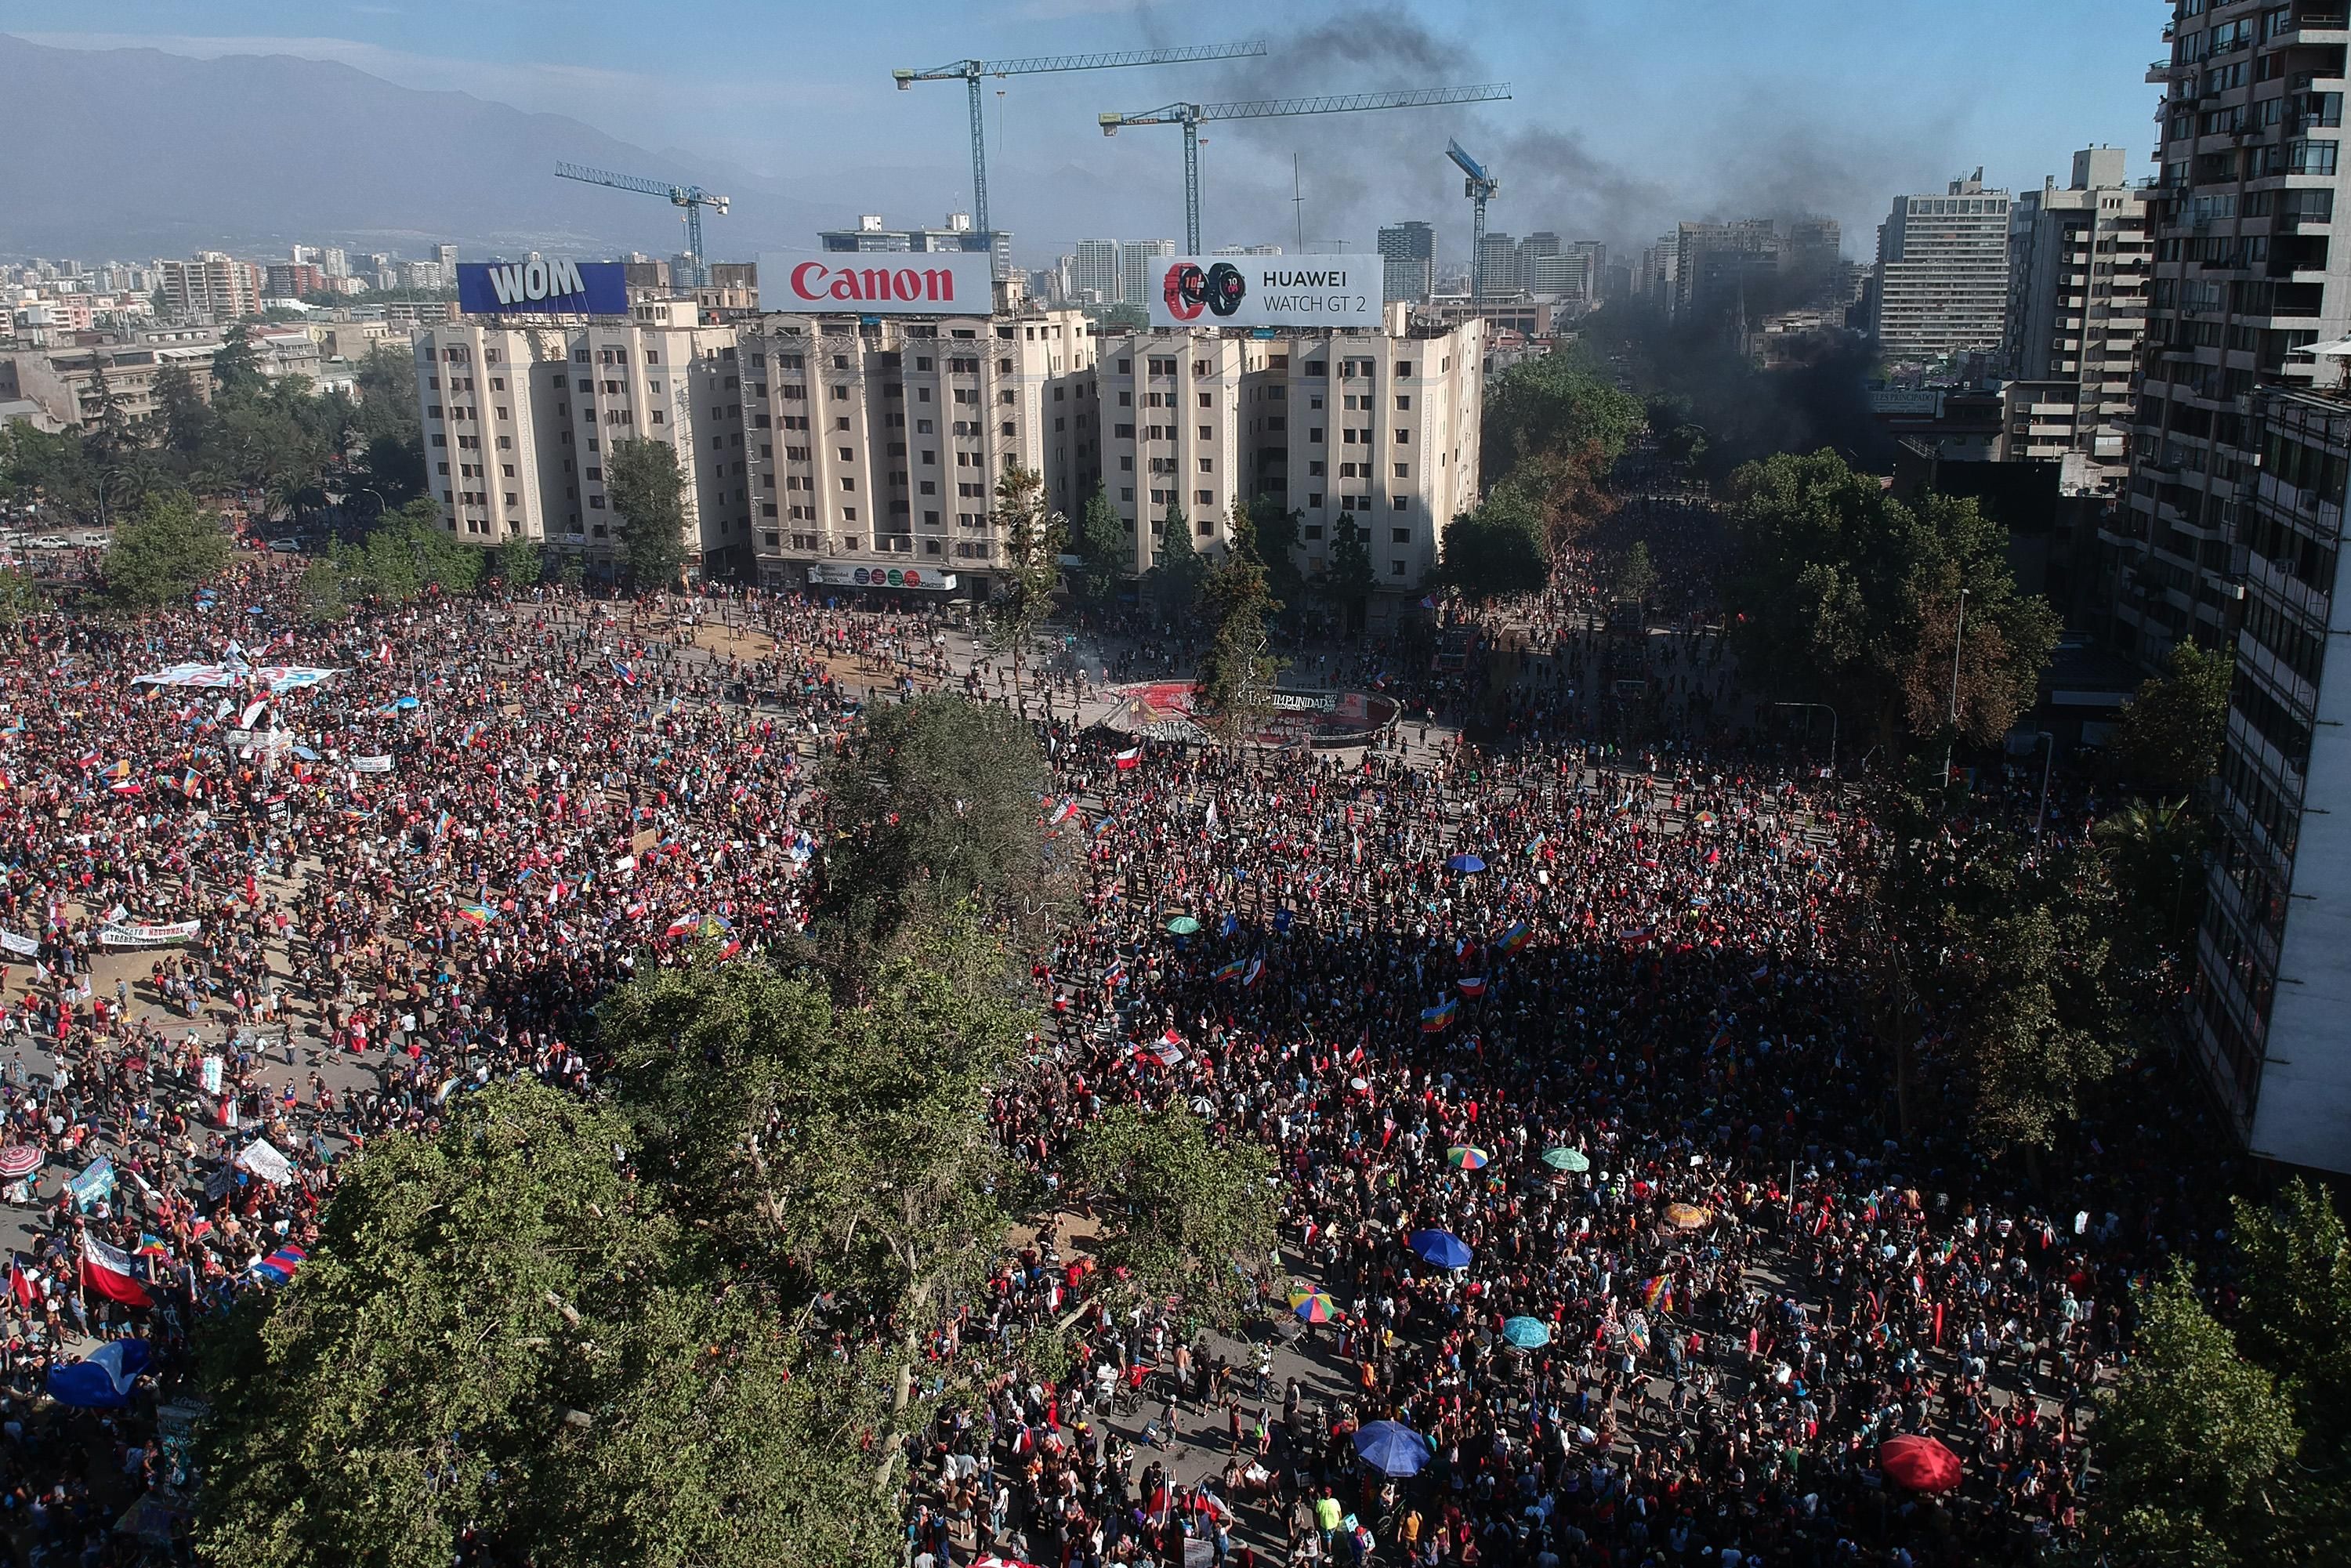 Aerial view as demonstrators march during a national strike and general demonstration called by different workers unions on November 12, 2019 in Santiago, Chile. On Sunday, Government announced it has agreed to start the process to write a new Constitution for the country, which is one of the most repeated demands by the demonstrators since October 18. (Photo by Marcelo Hernandez/Getty Images)